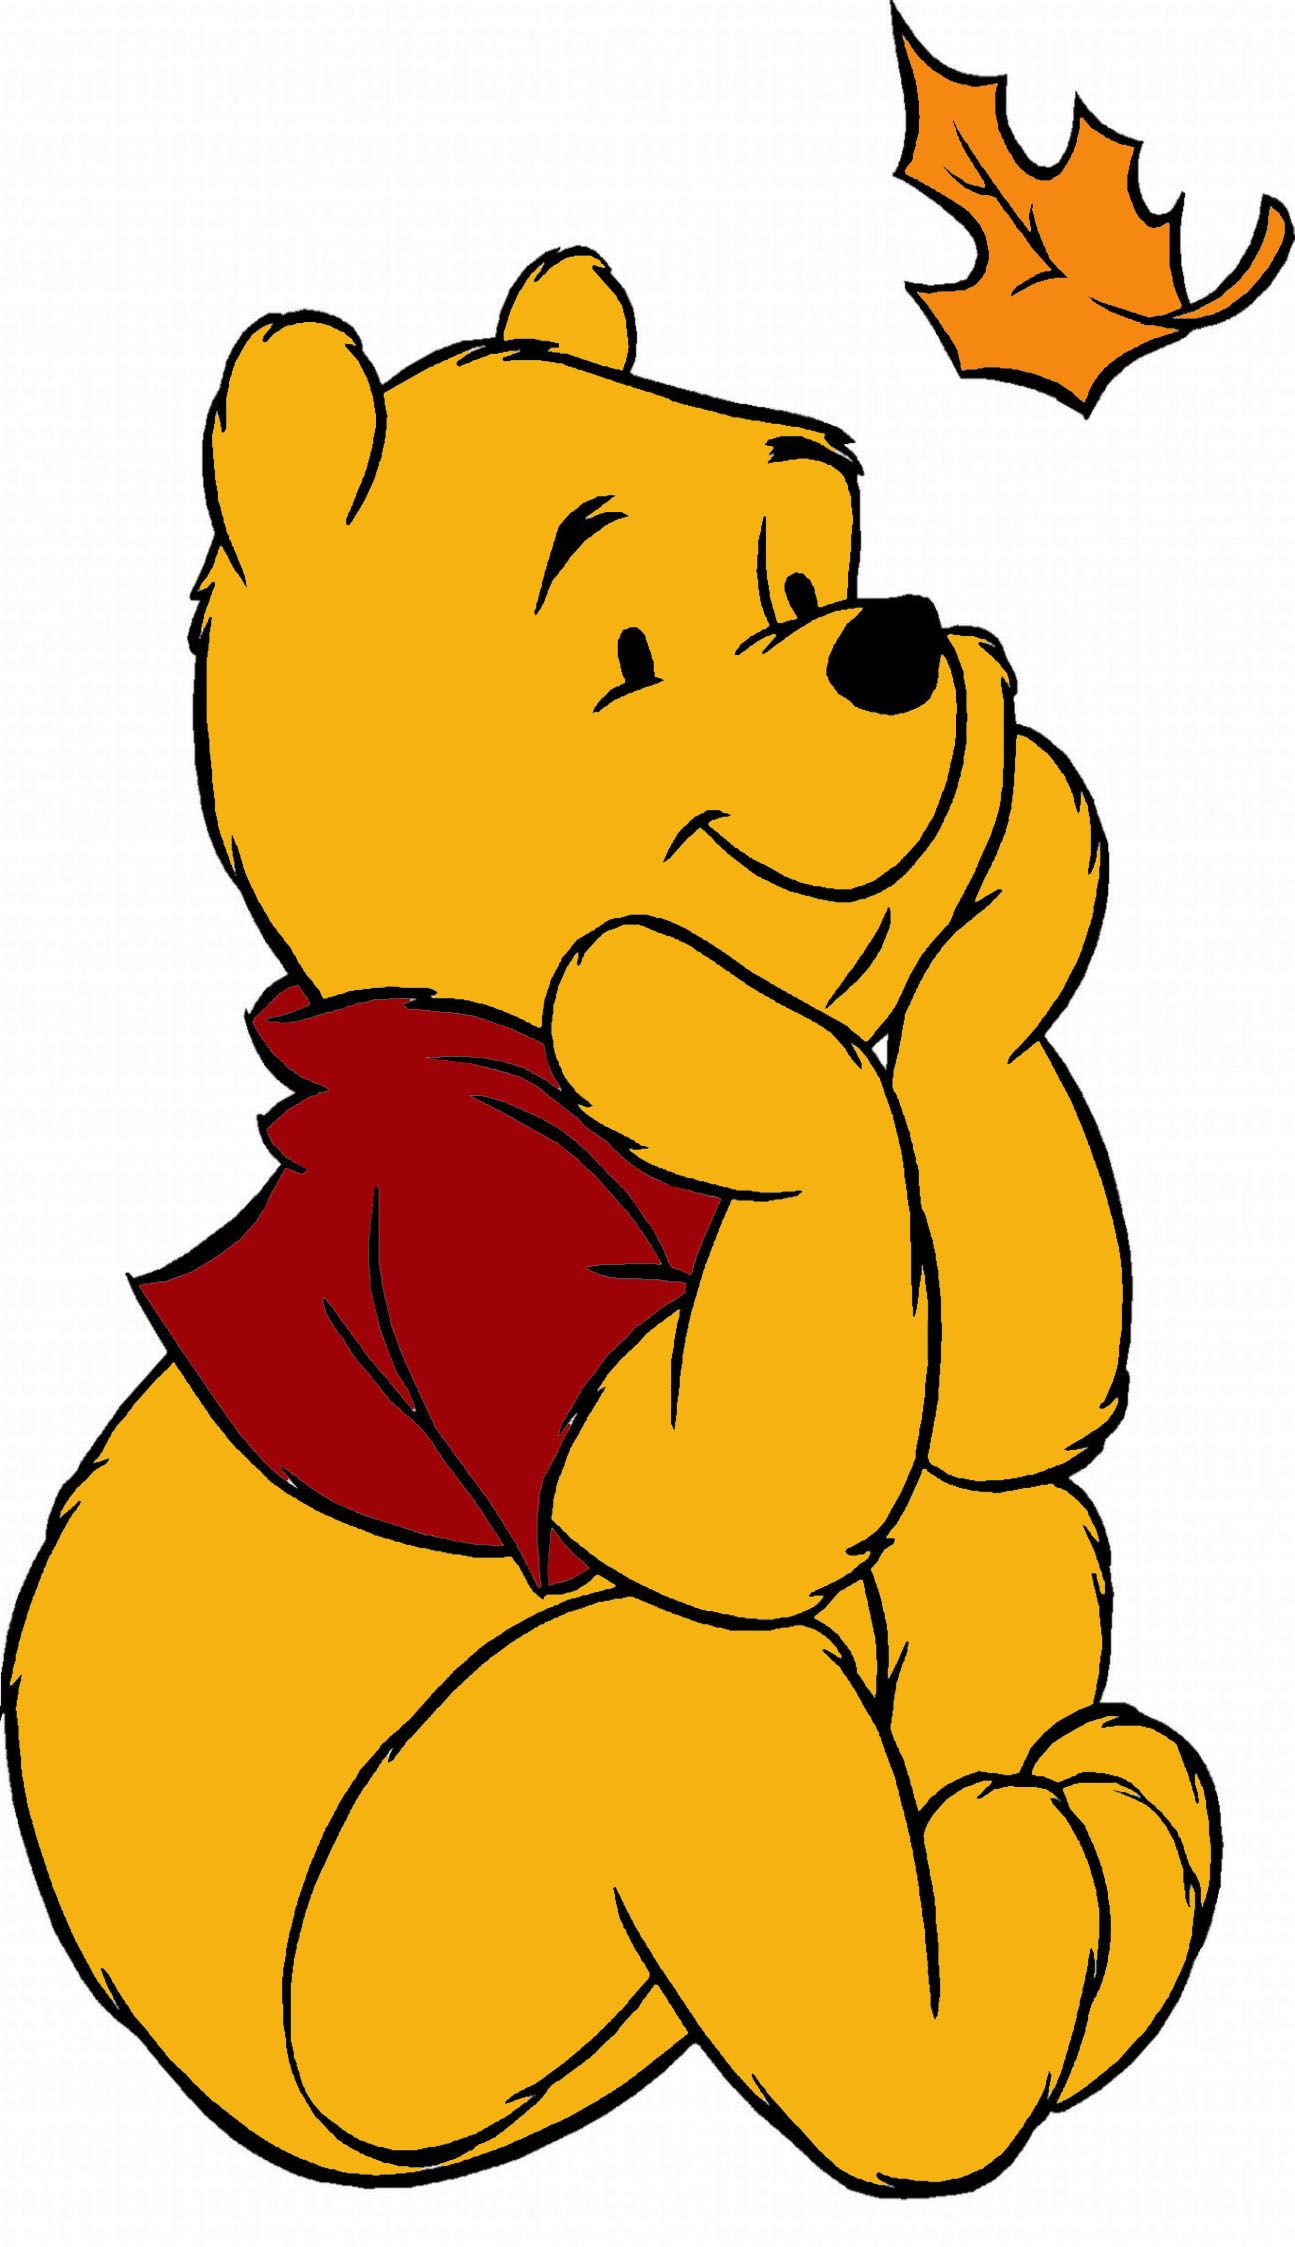 Winnie The Pooh And Friends Clipart At GetDrawings Free Download.